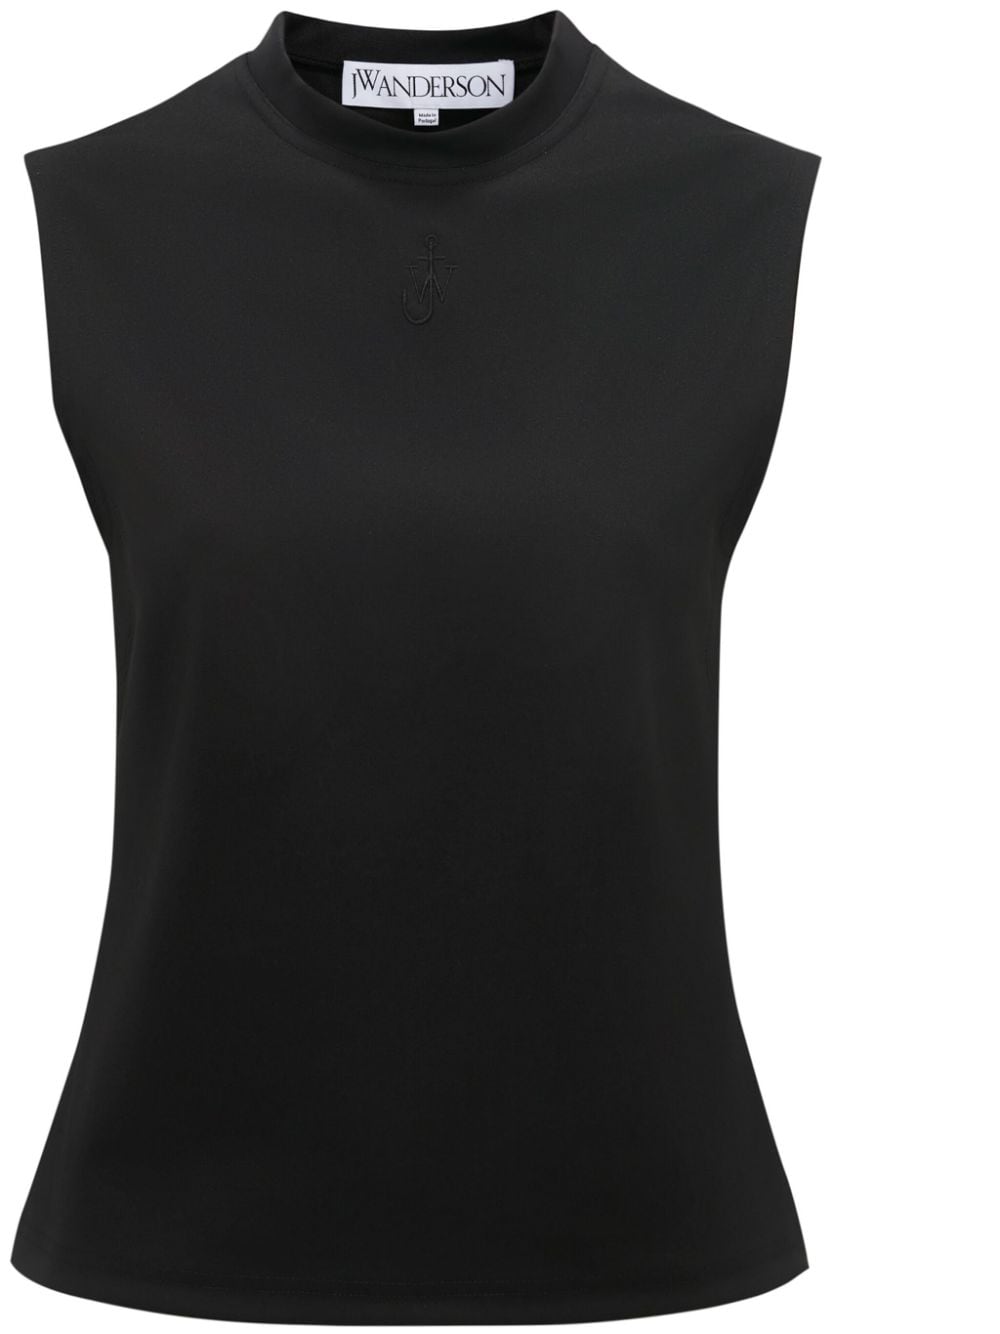 JW Anderson logo-embroidered tank top - Black